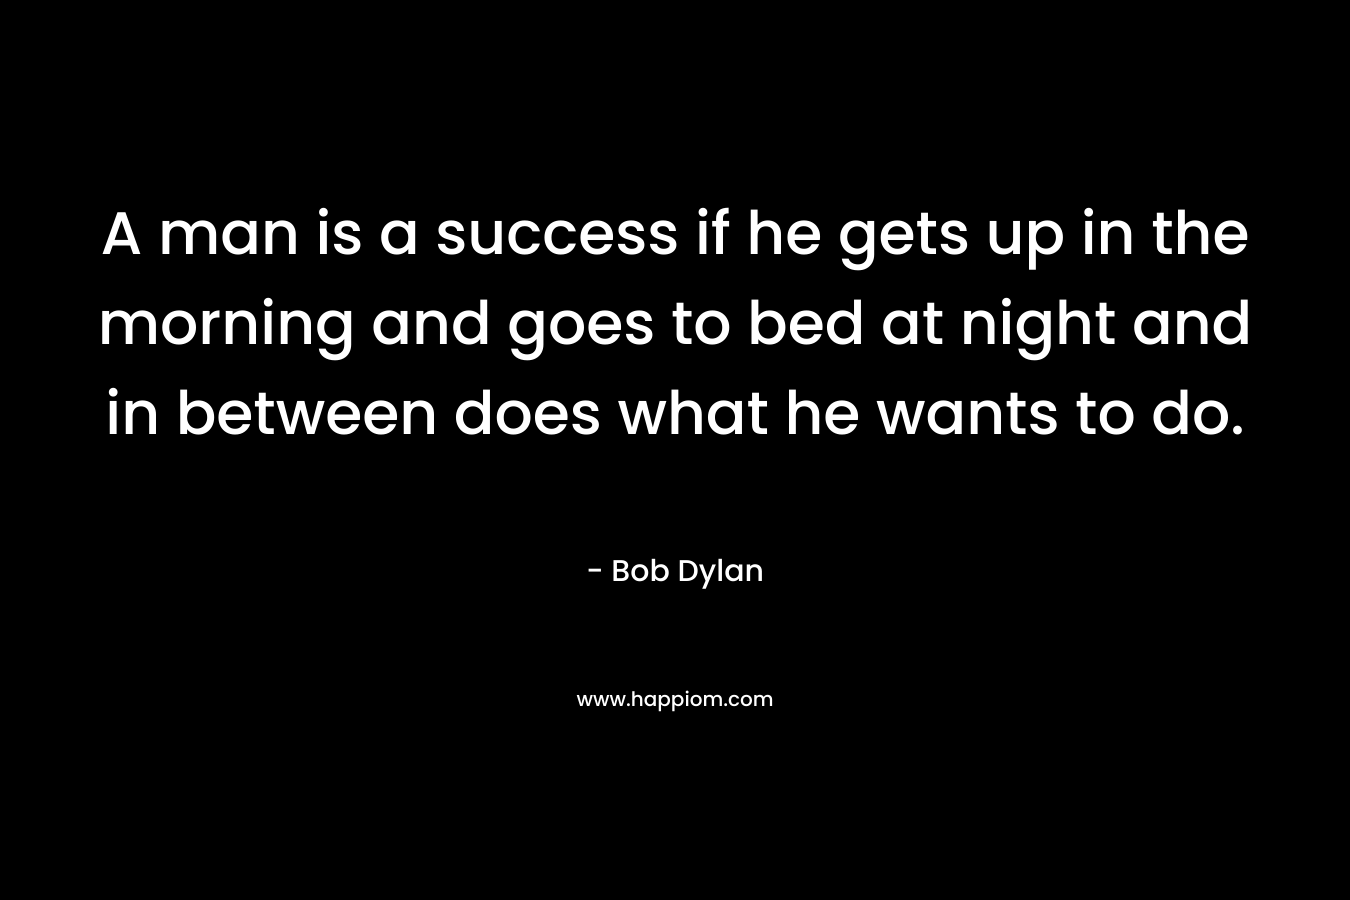 A man is a success if he gets up in the morning and goes to bed at night and in between does what he wants to do.